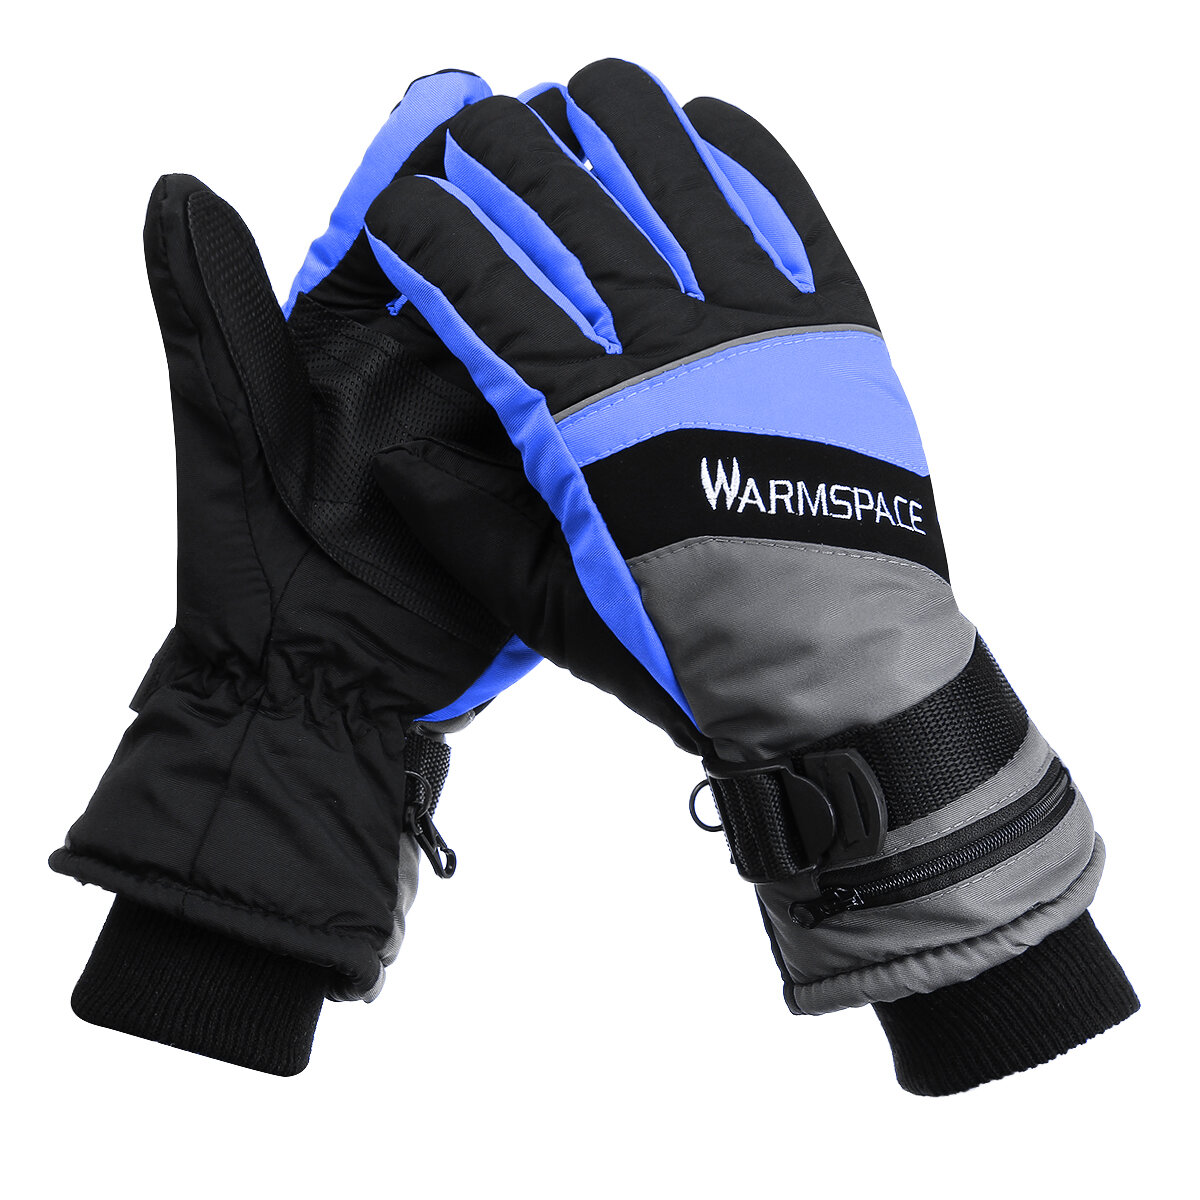 WARMSPACE Battery Electric Heated Gloves Cycling Winter Warm Motorcycle Bike Riding